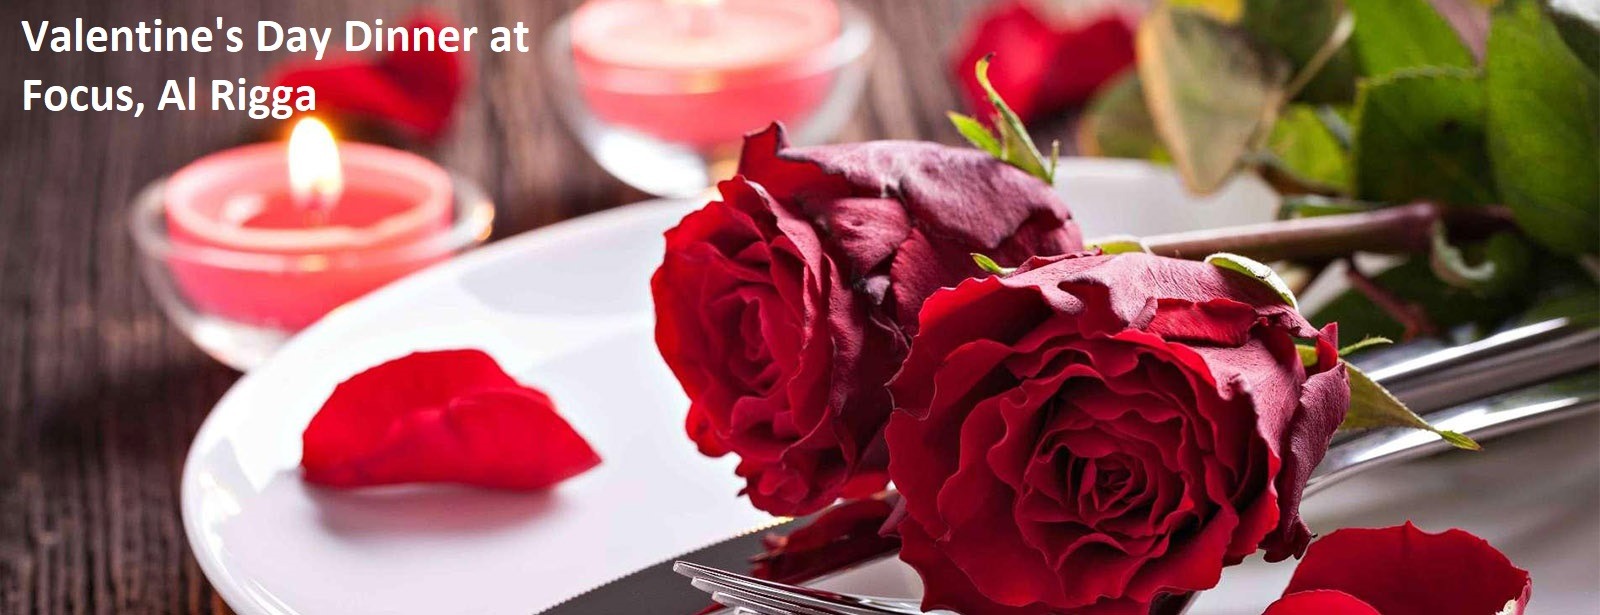 Valentine’s Day Dinner at the Hyatt Place - Coming Soon in UAE